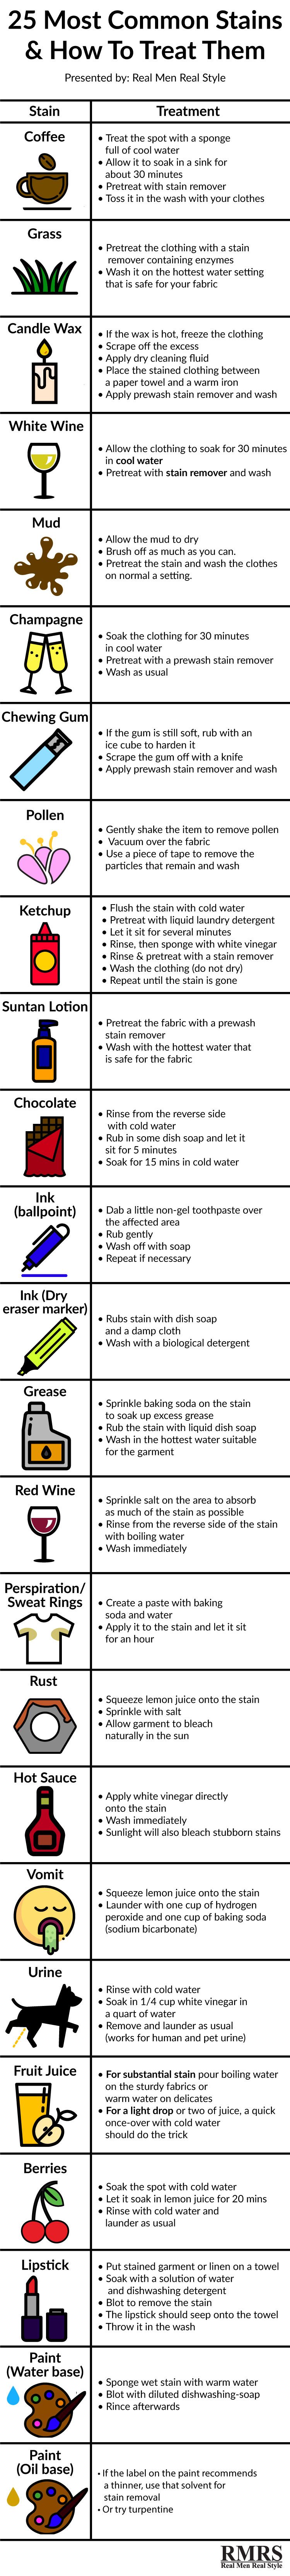 25 Most Common Stains & How To Treat Them